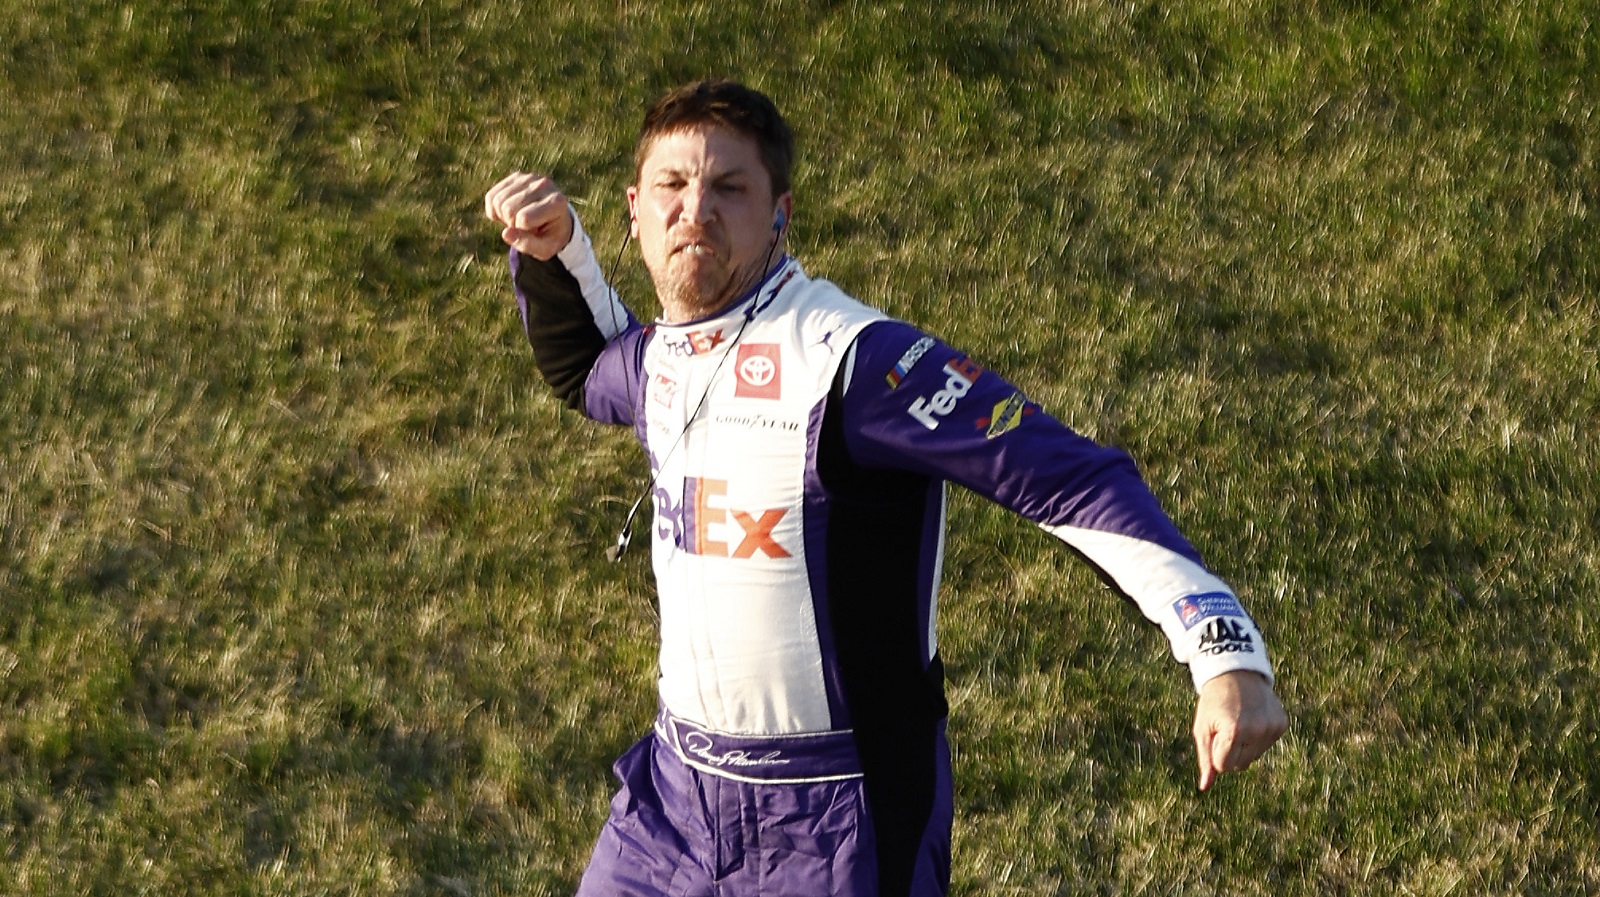 Denny Hamlin, driver of the No. 11 Toyota, celebrates after winning the NASCAR Cup Series Toyota Owners 400 at Richmond Raceway on April 3, 2022. | Jared C. Tilton/Getty Images